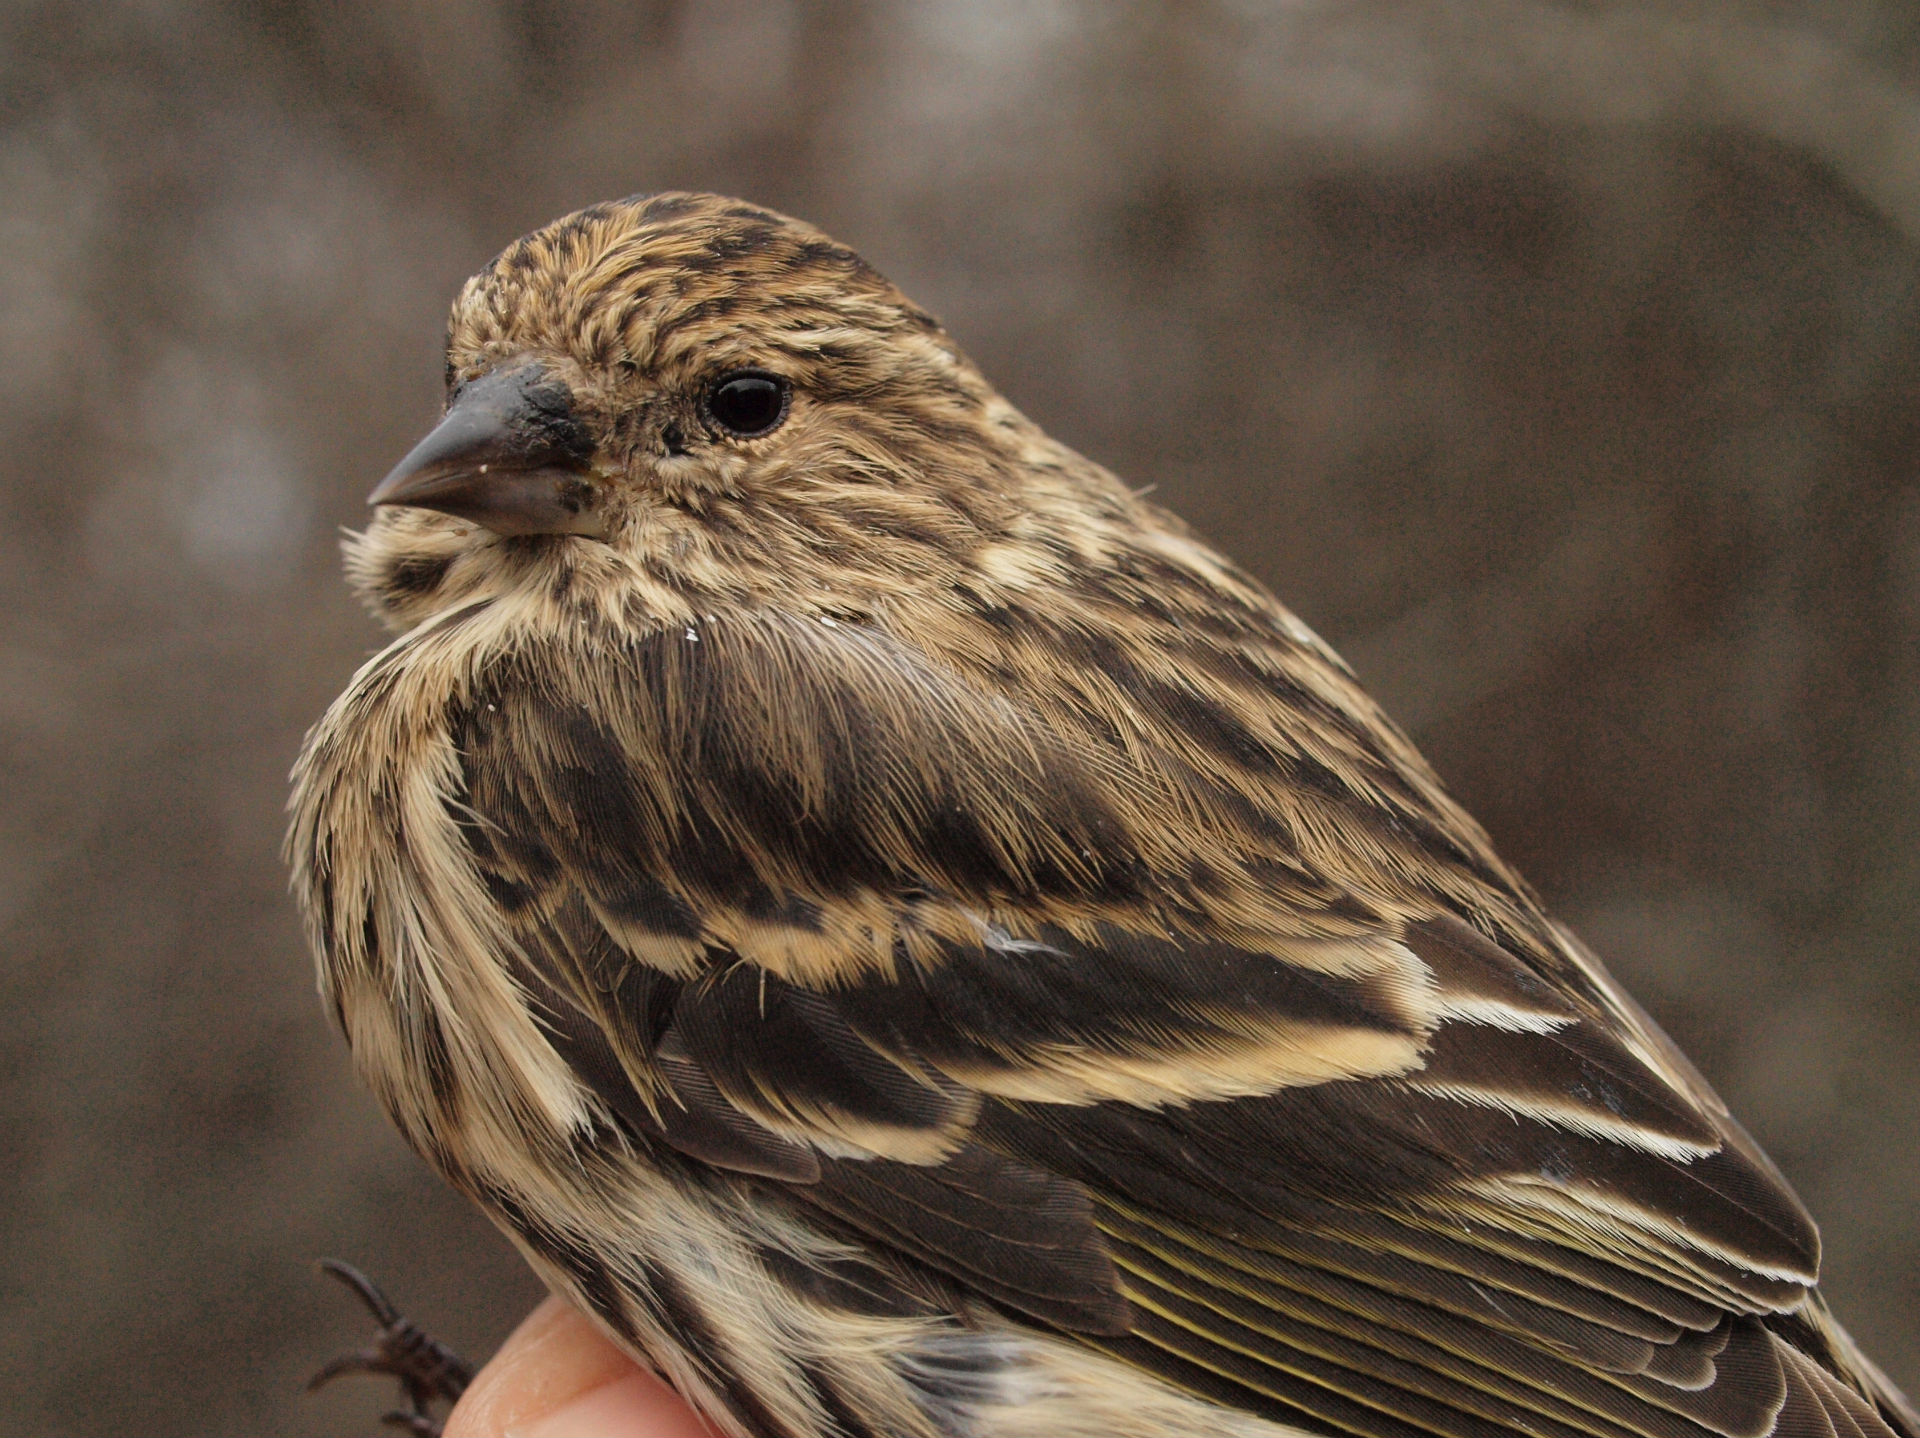 Also scarce so far this winter are Pine Siskins, with just two banded at MBO as well (Photo by Simon Duval)